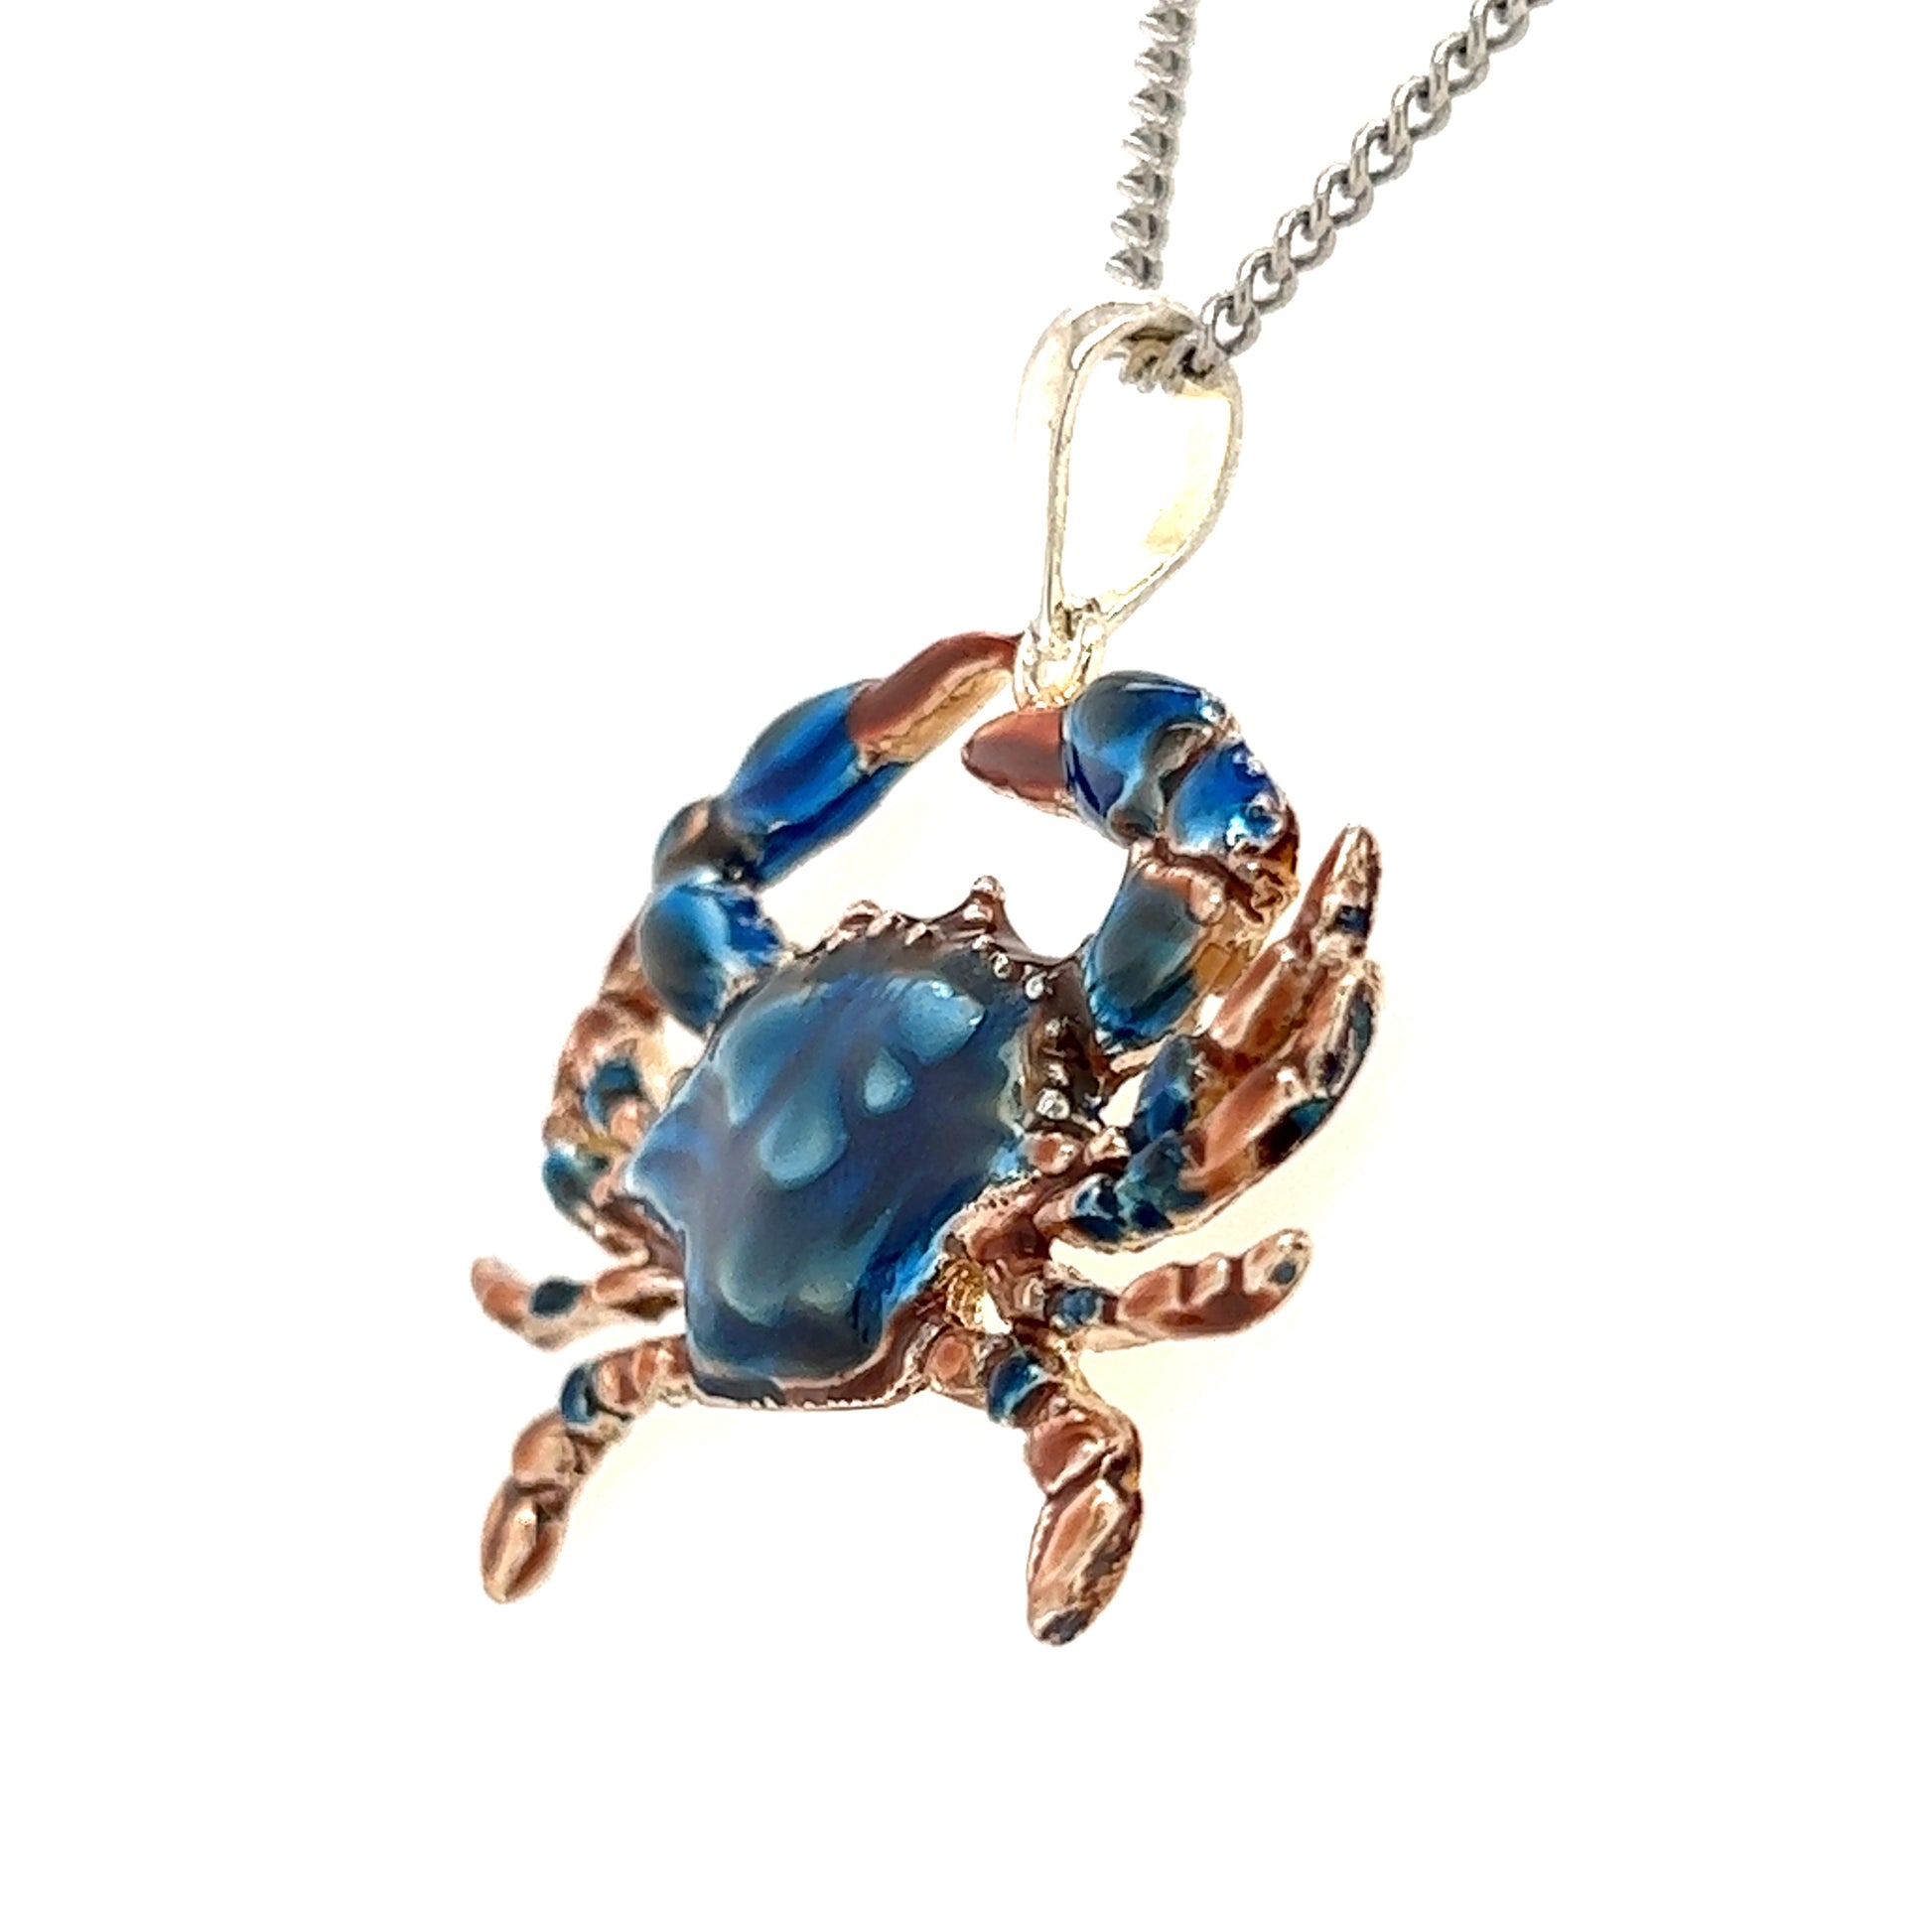 Blue Crab Large Pendant with Enamel in Sterling Silver Pendant and Chain Right Side View